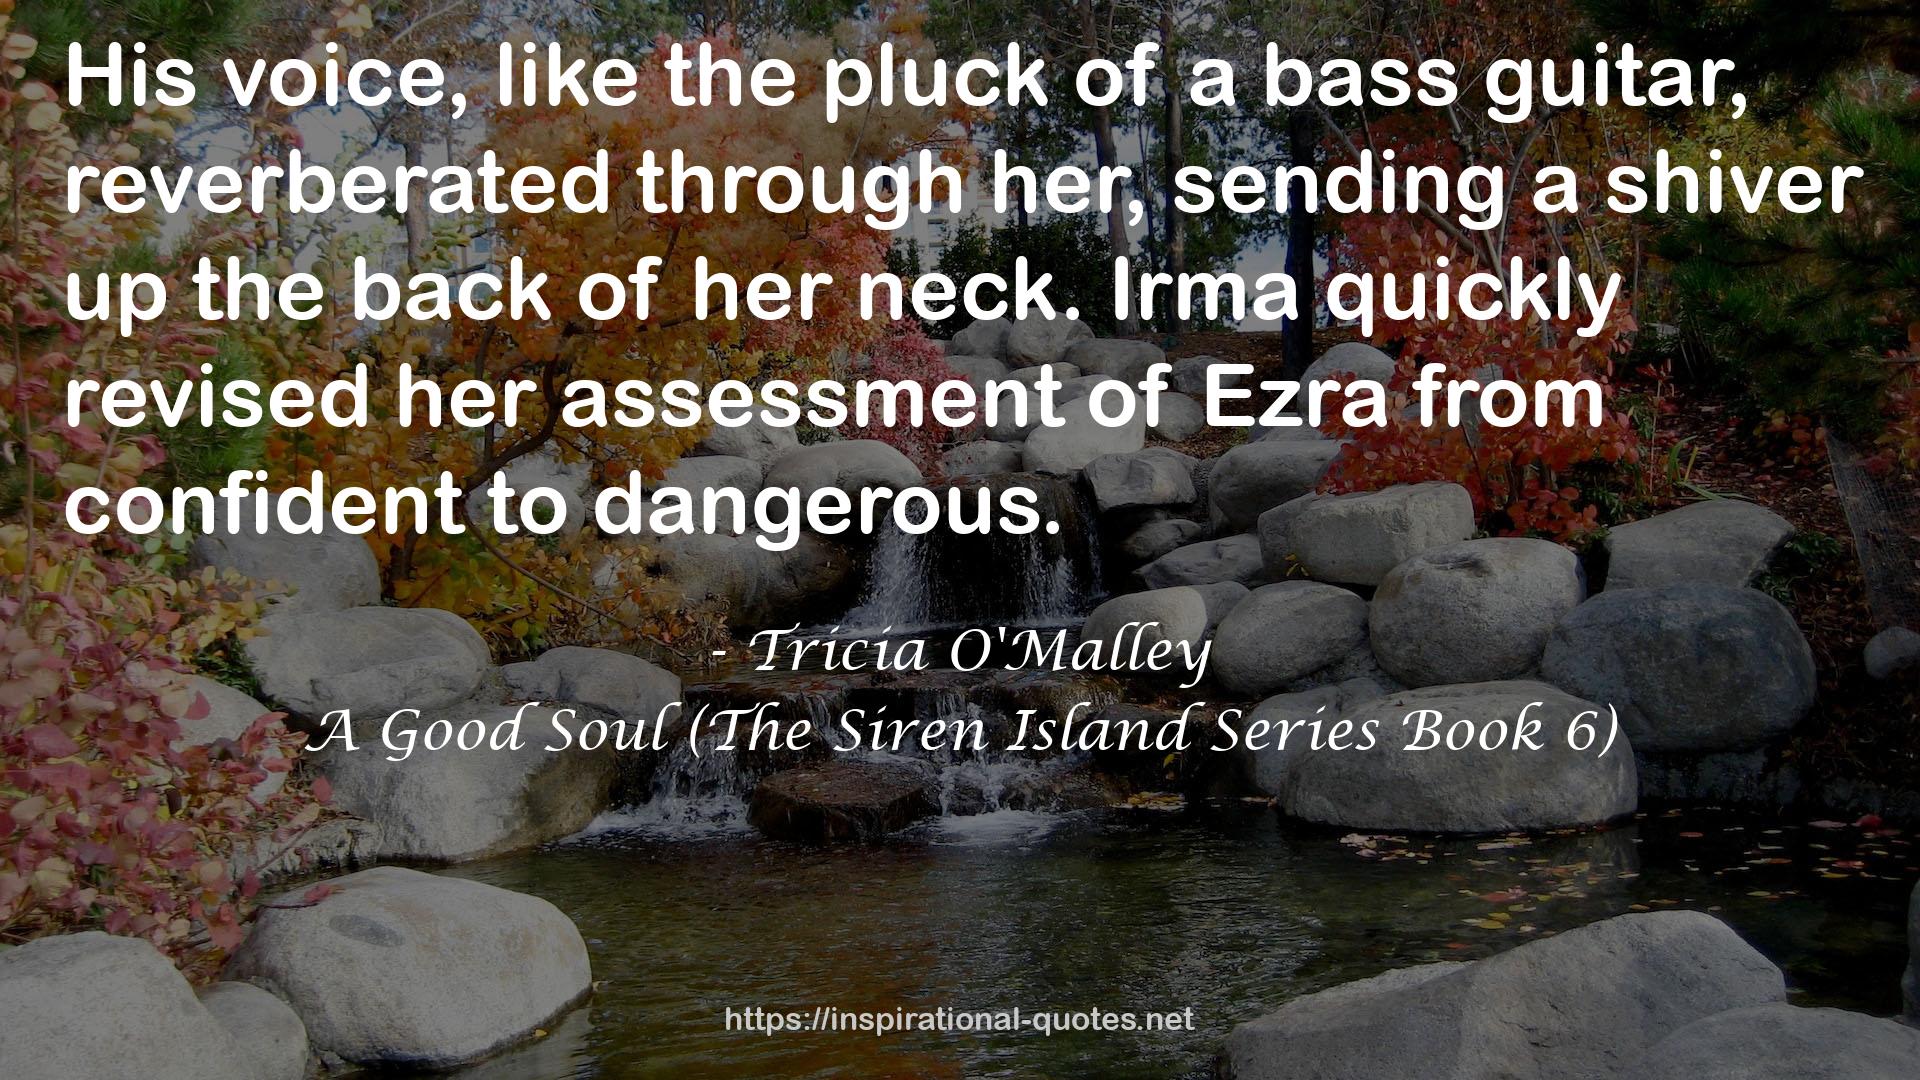 A Good Soul (The Siren Island Series Book 6) QUOTES